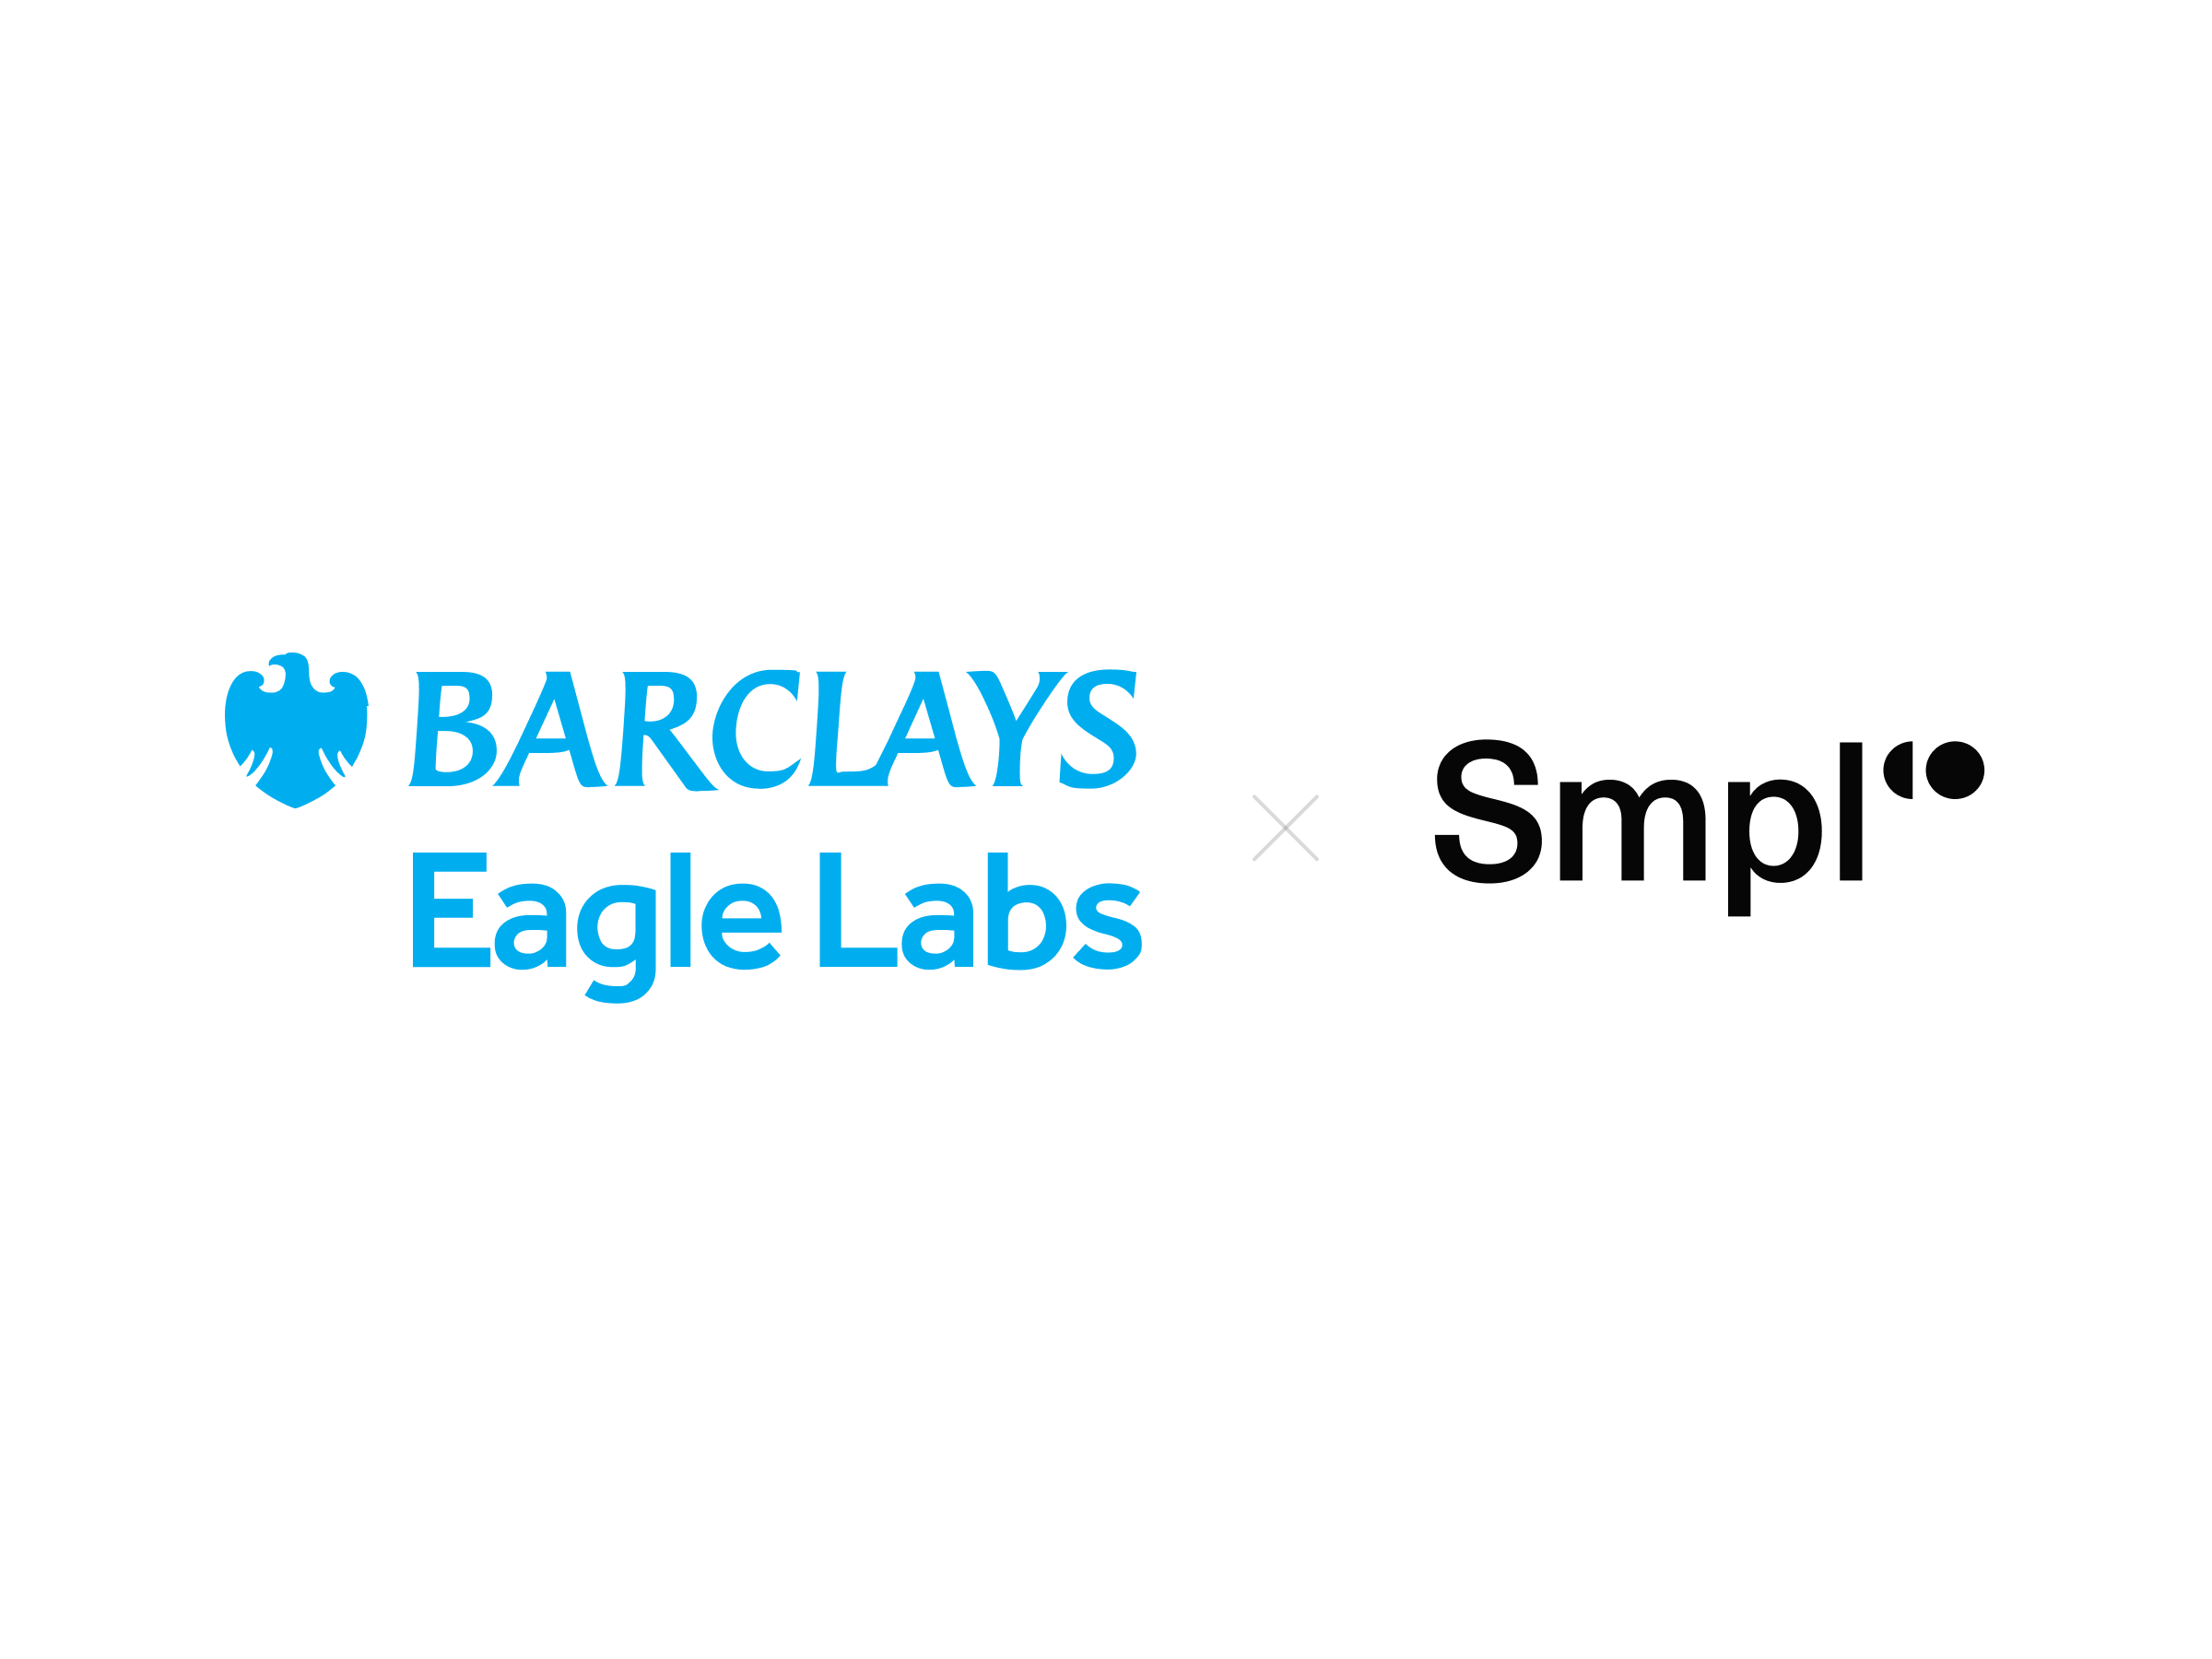 SMPLCO AND BARCLAYS EAGLE LABS LOGOS NEXT TO EACH OTHER